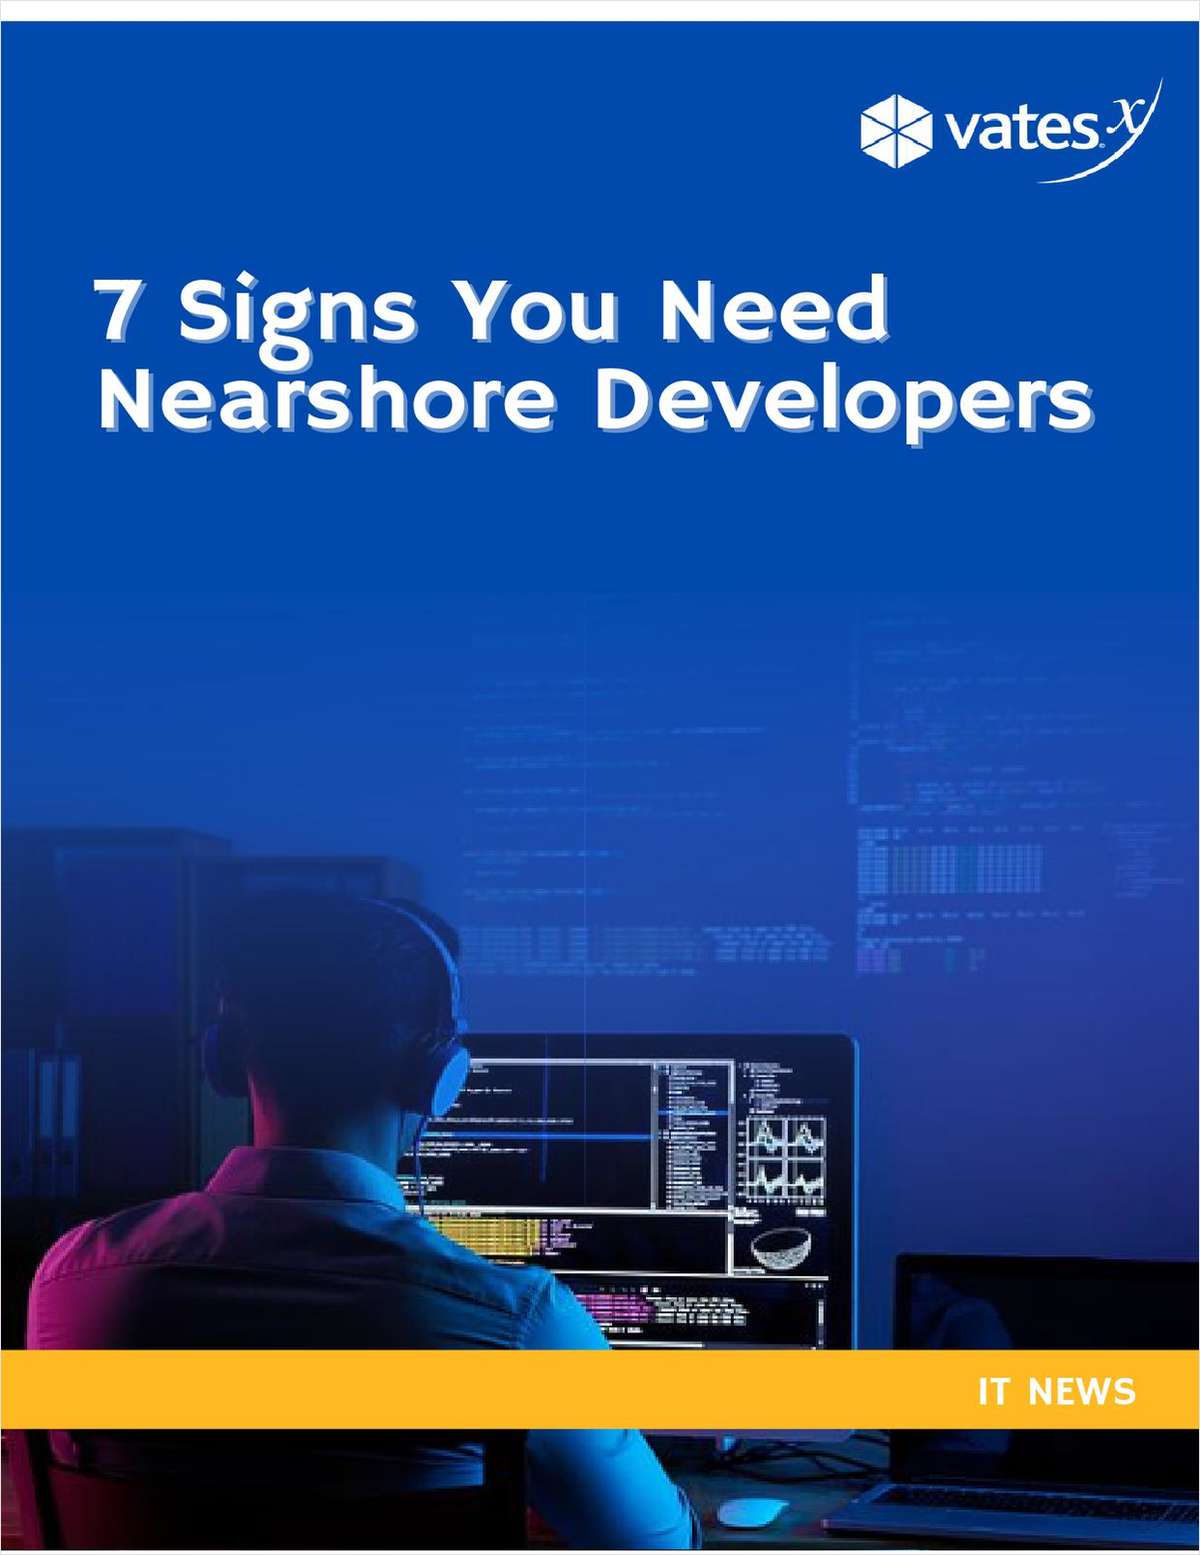 7 Signs You Need Nearshore Developers